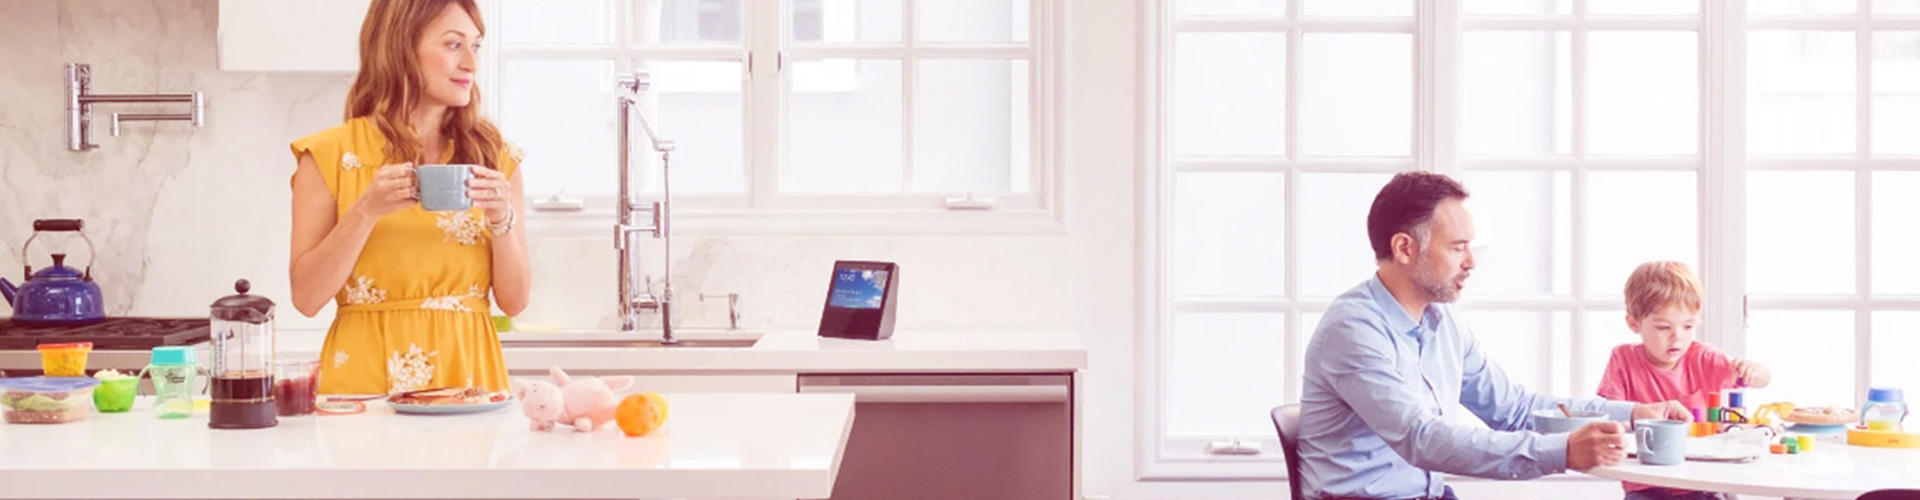 Blog banner featuring family at home with voice activated device on kitchen counter